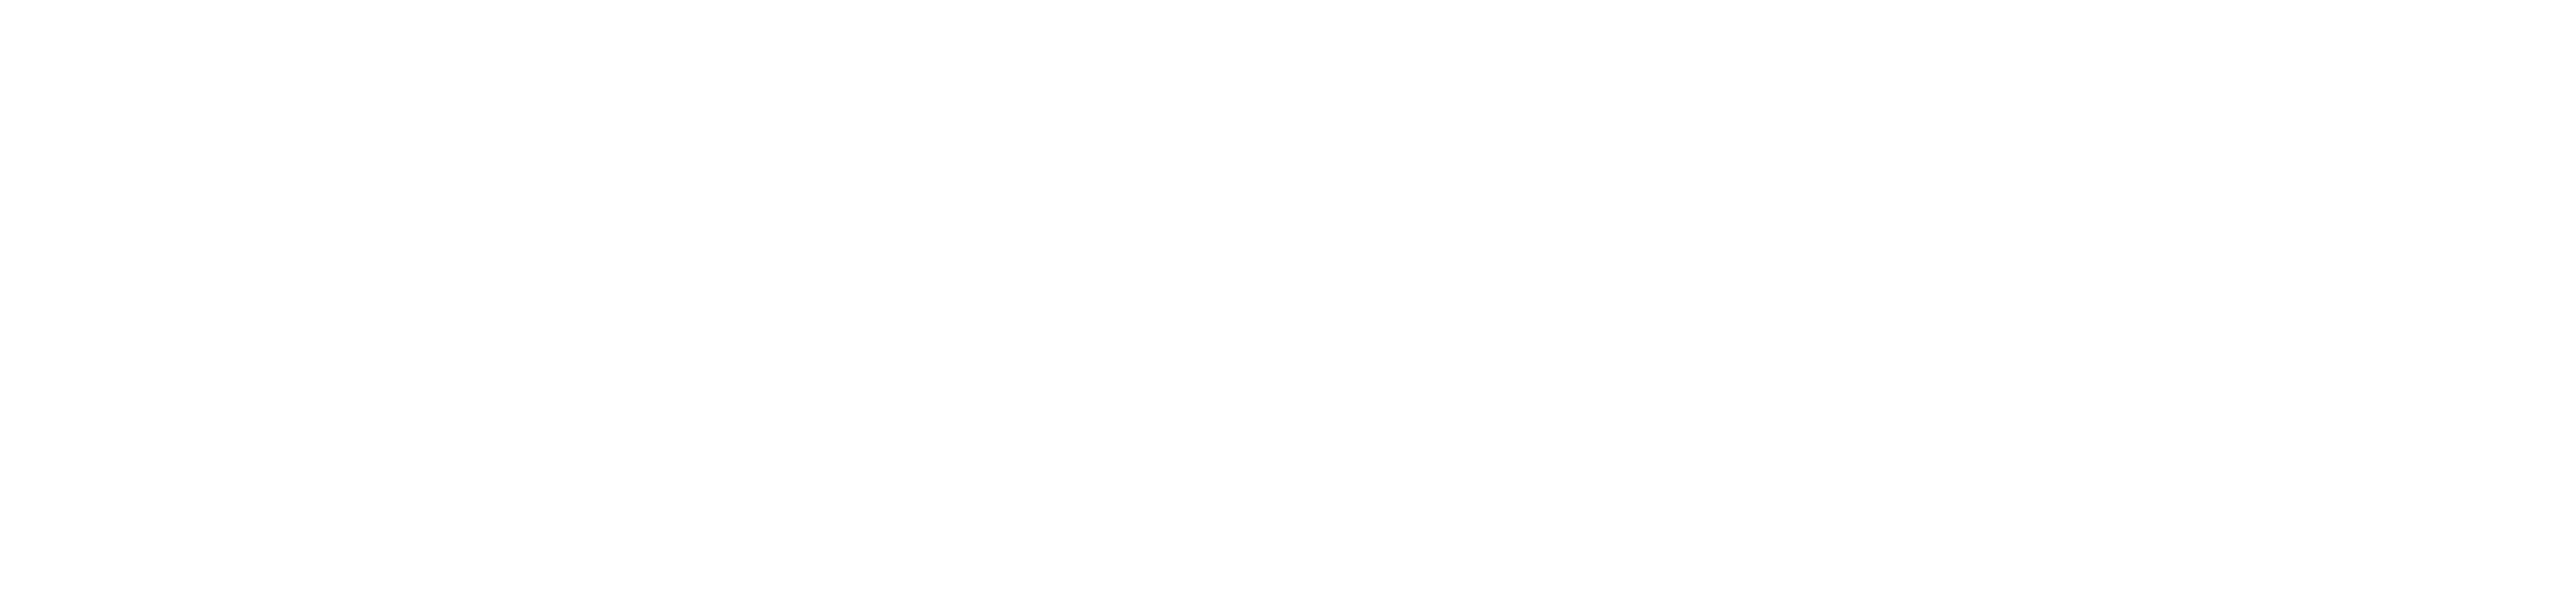 Chess For Freedom